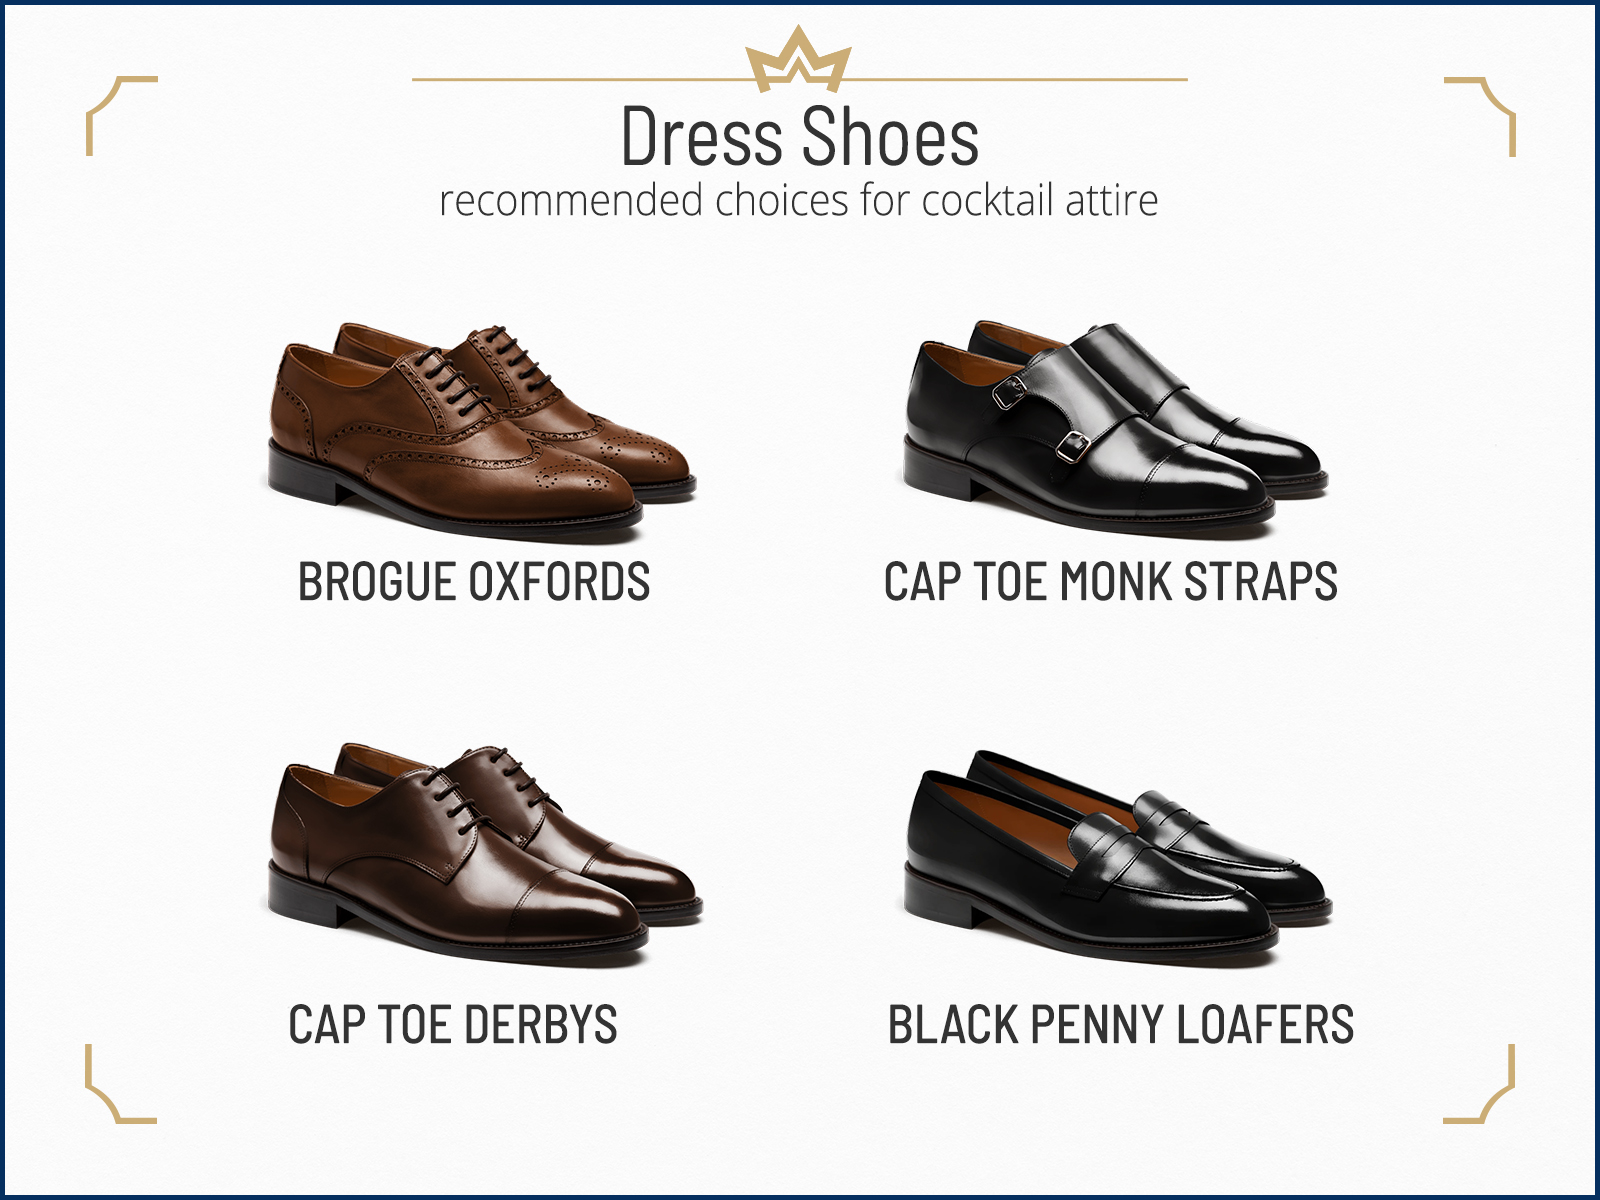 Recommended dress shoes for semi-formal cocktail attire